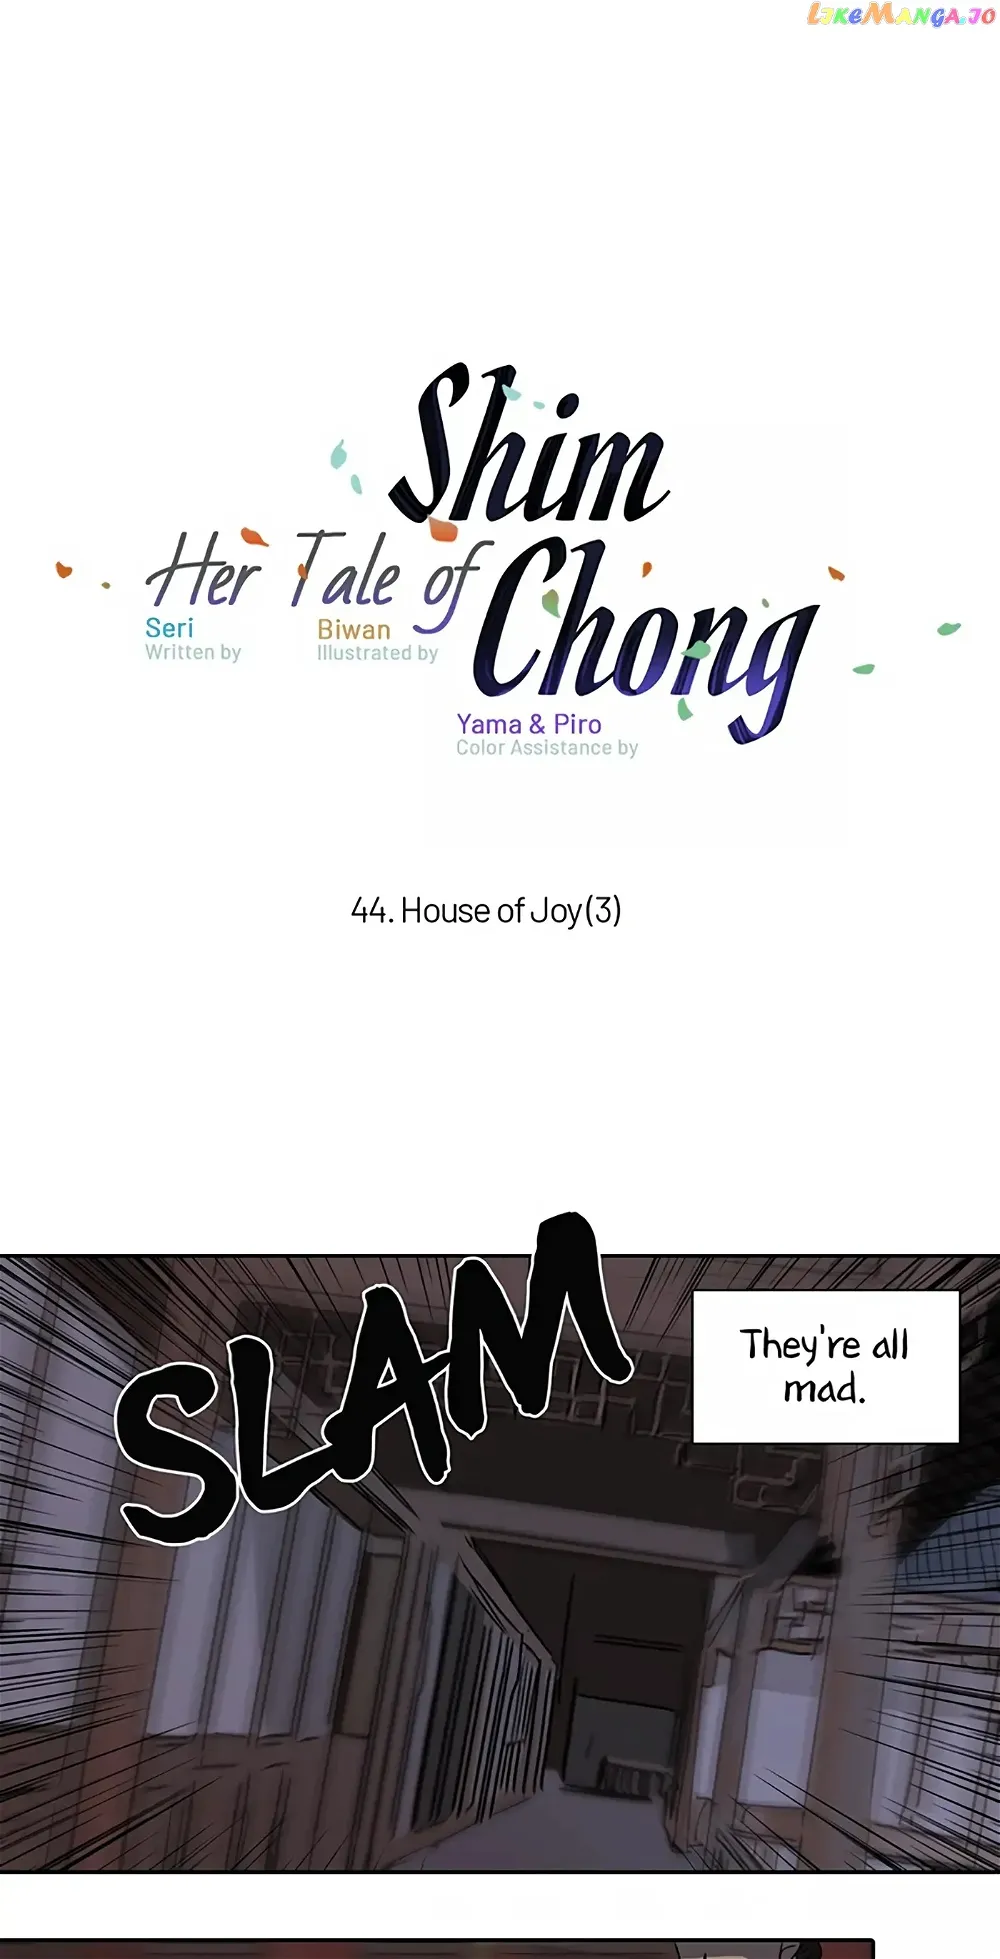 Her Tale of Shim Chong Chapter 44 - Page 1